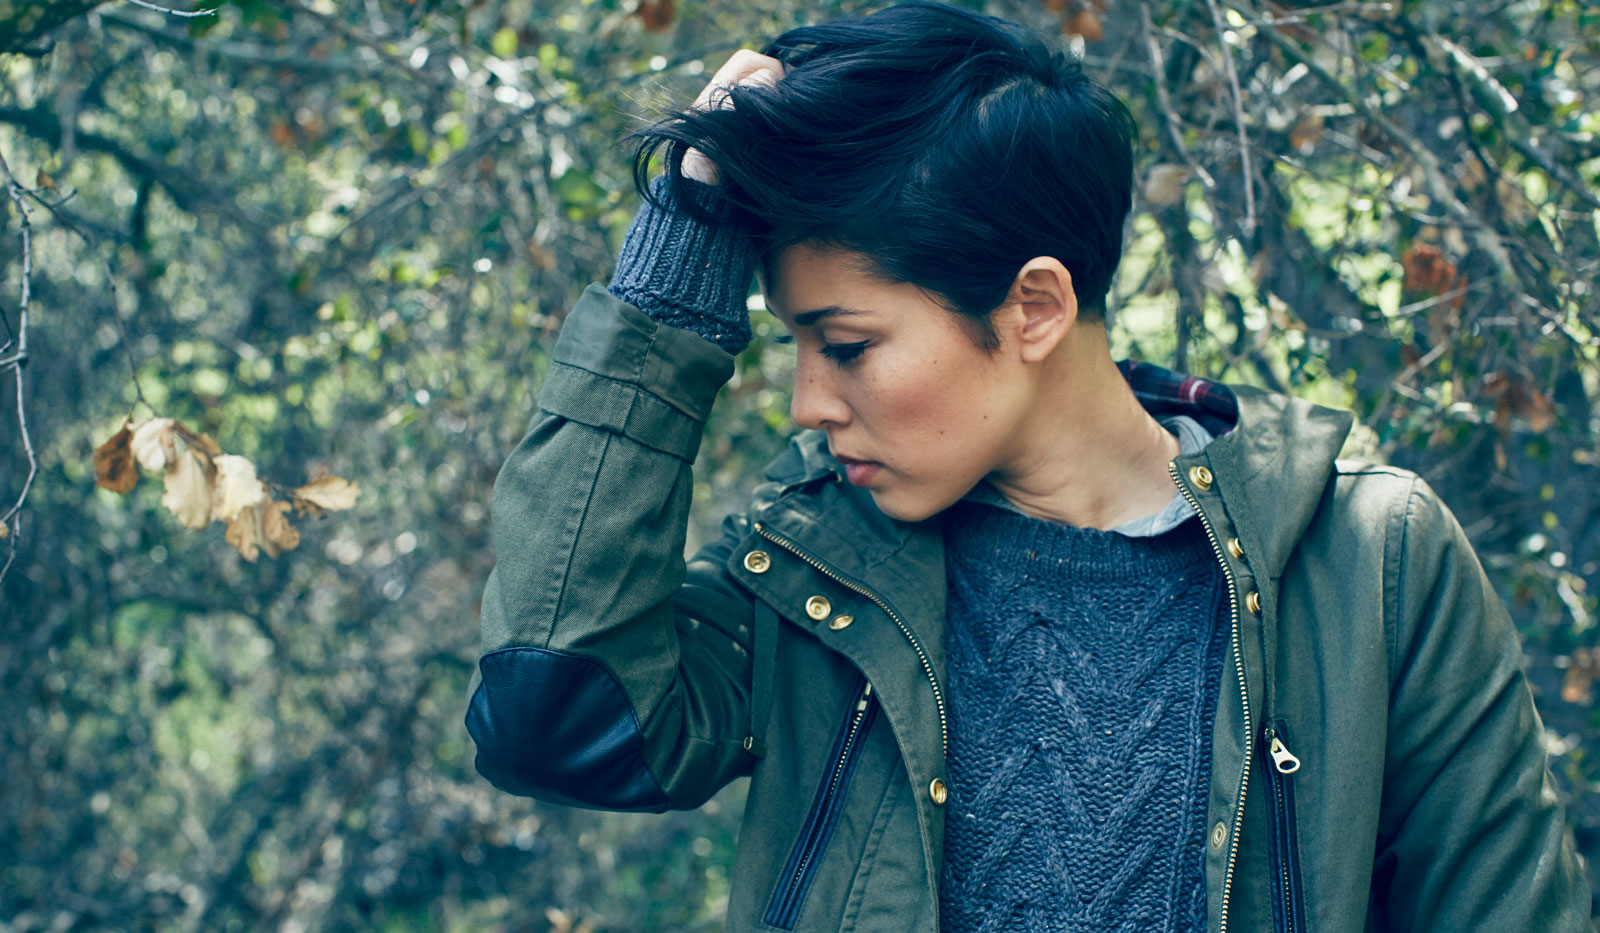 Elements of Life – an interview with Kina Grannis